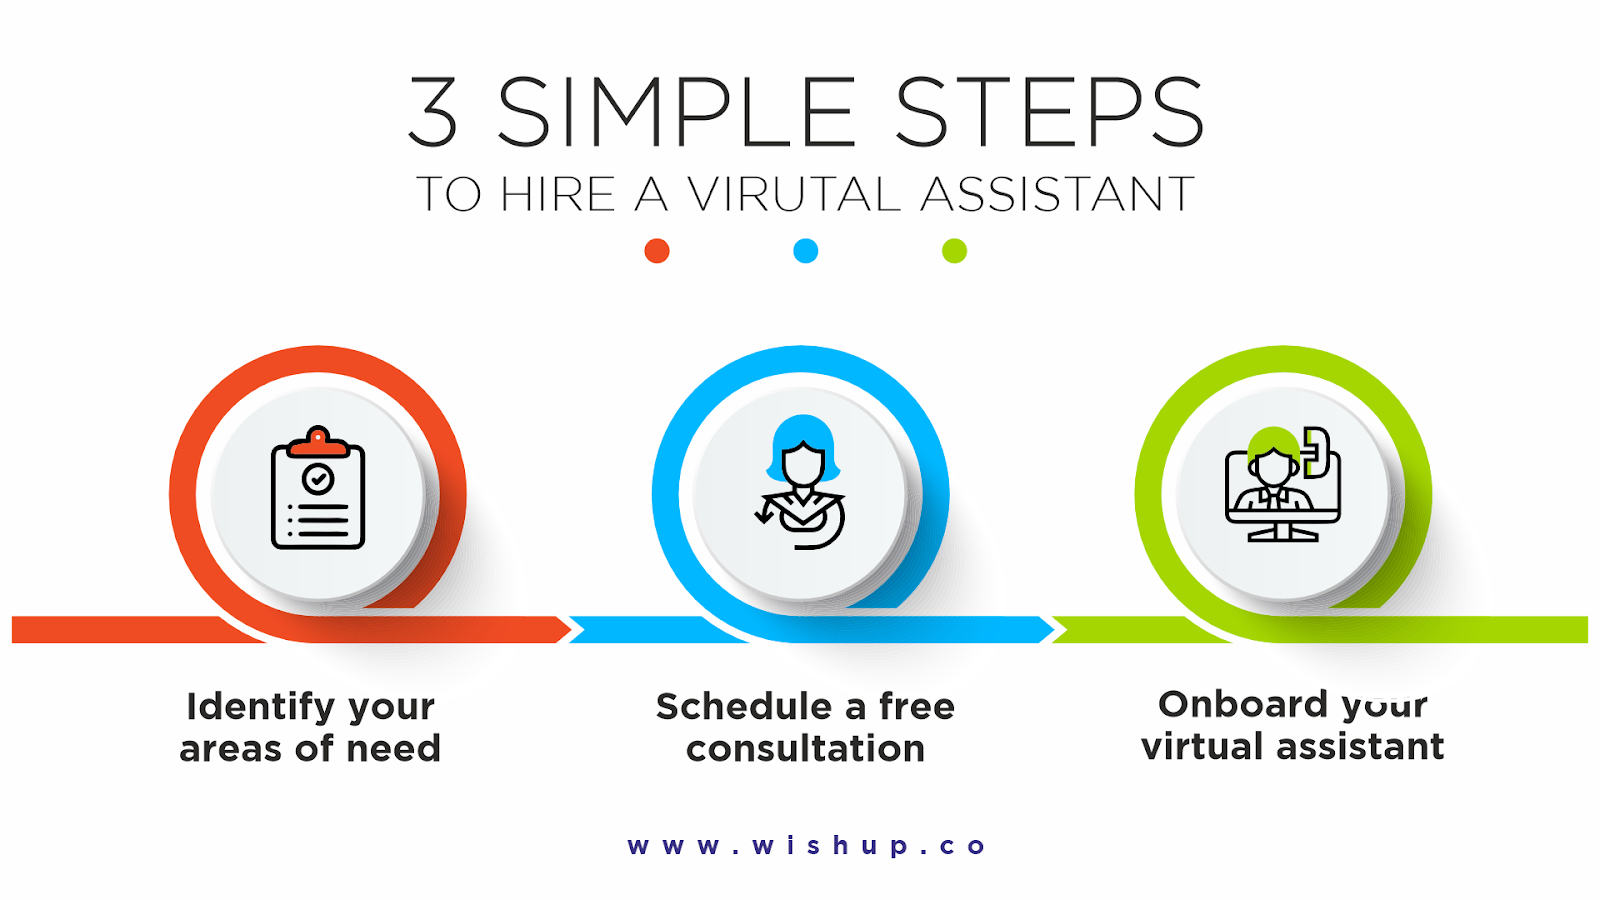 Hiring a virtual assistant has never been easier